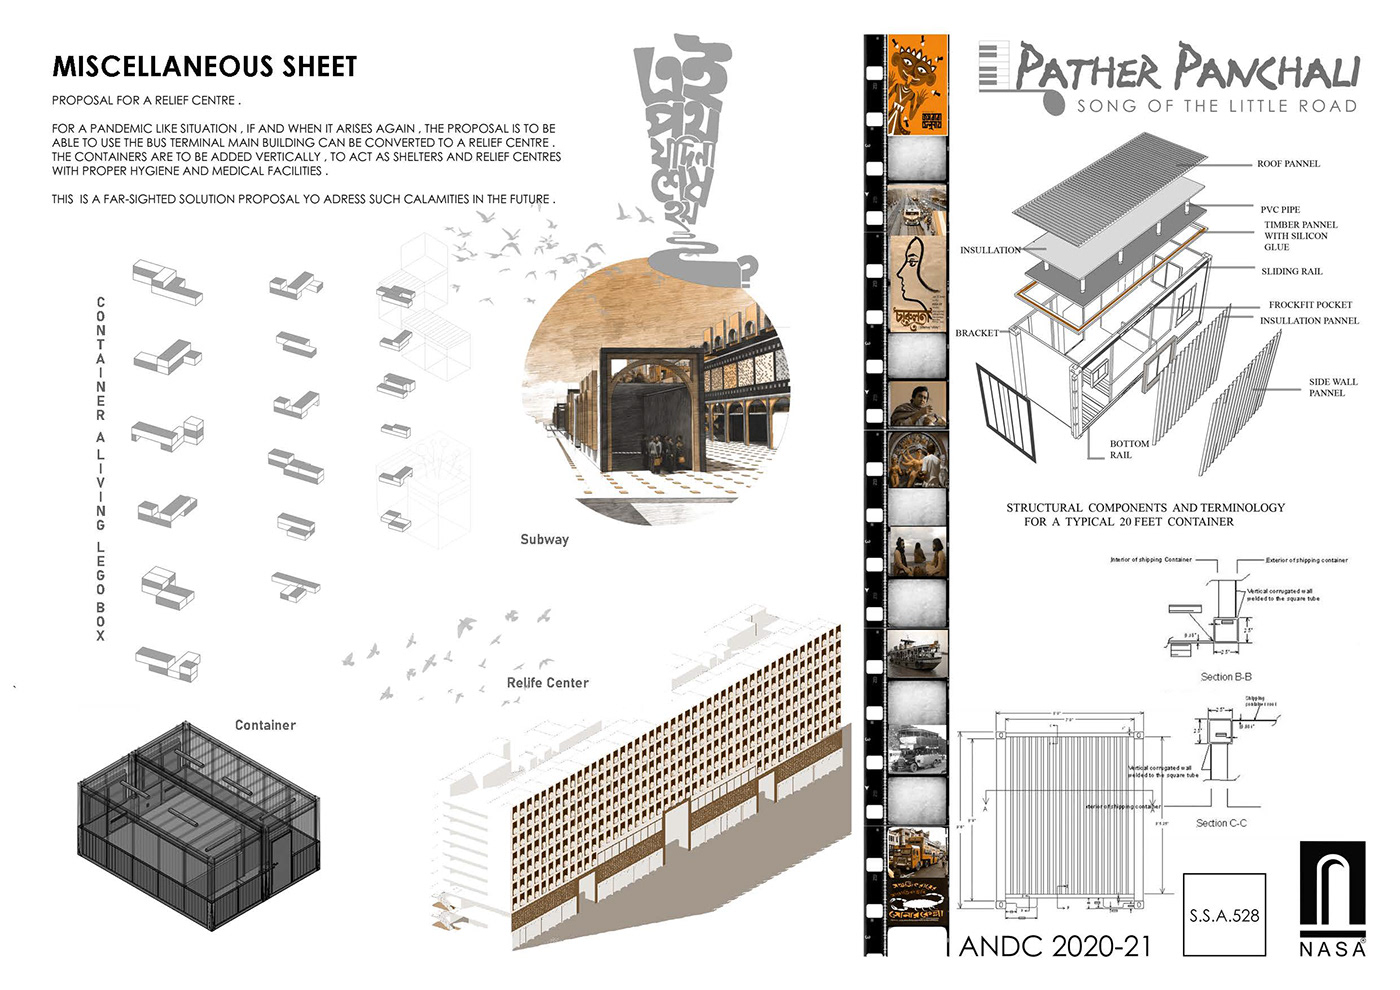 andc architecture architecture competition AutoCAD concept lumion photoshop SketchUP vray